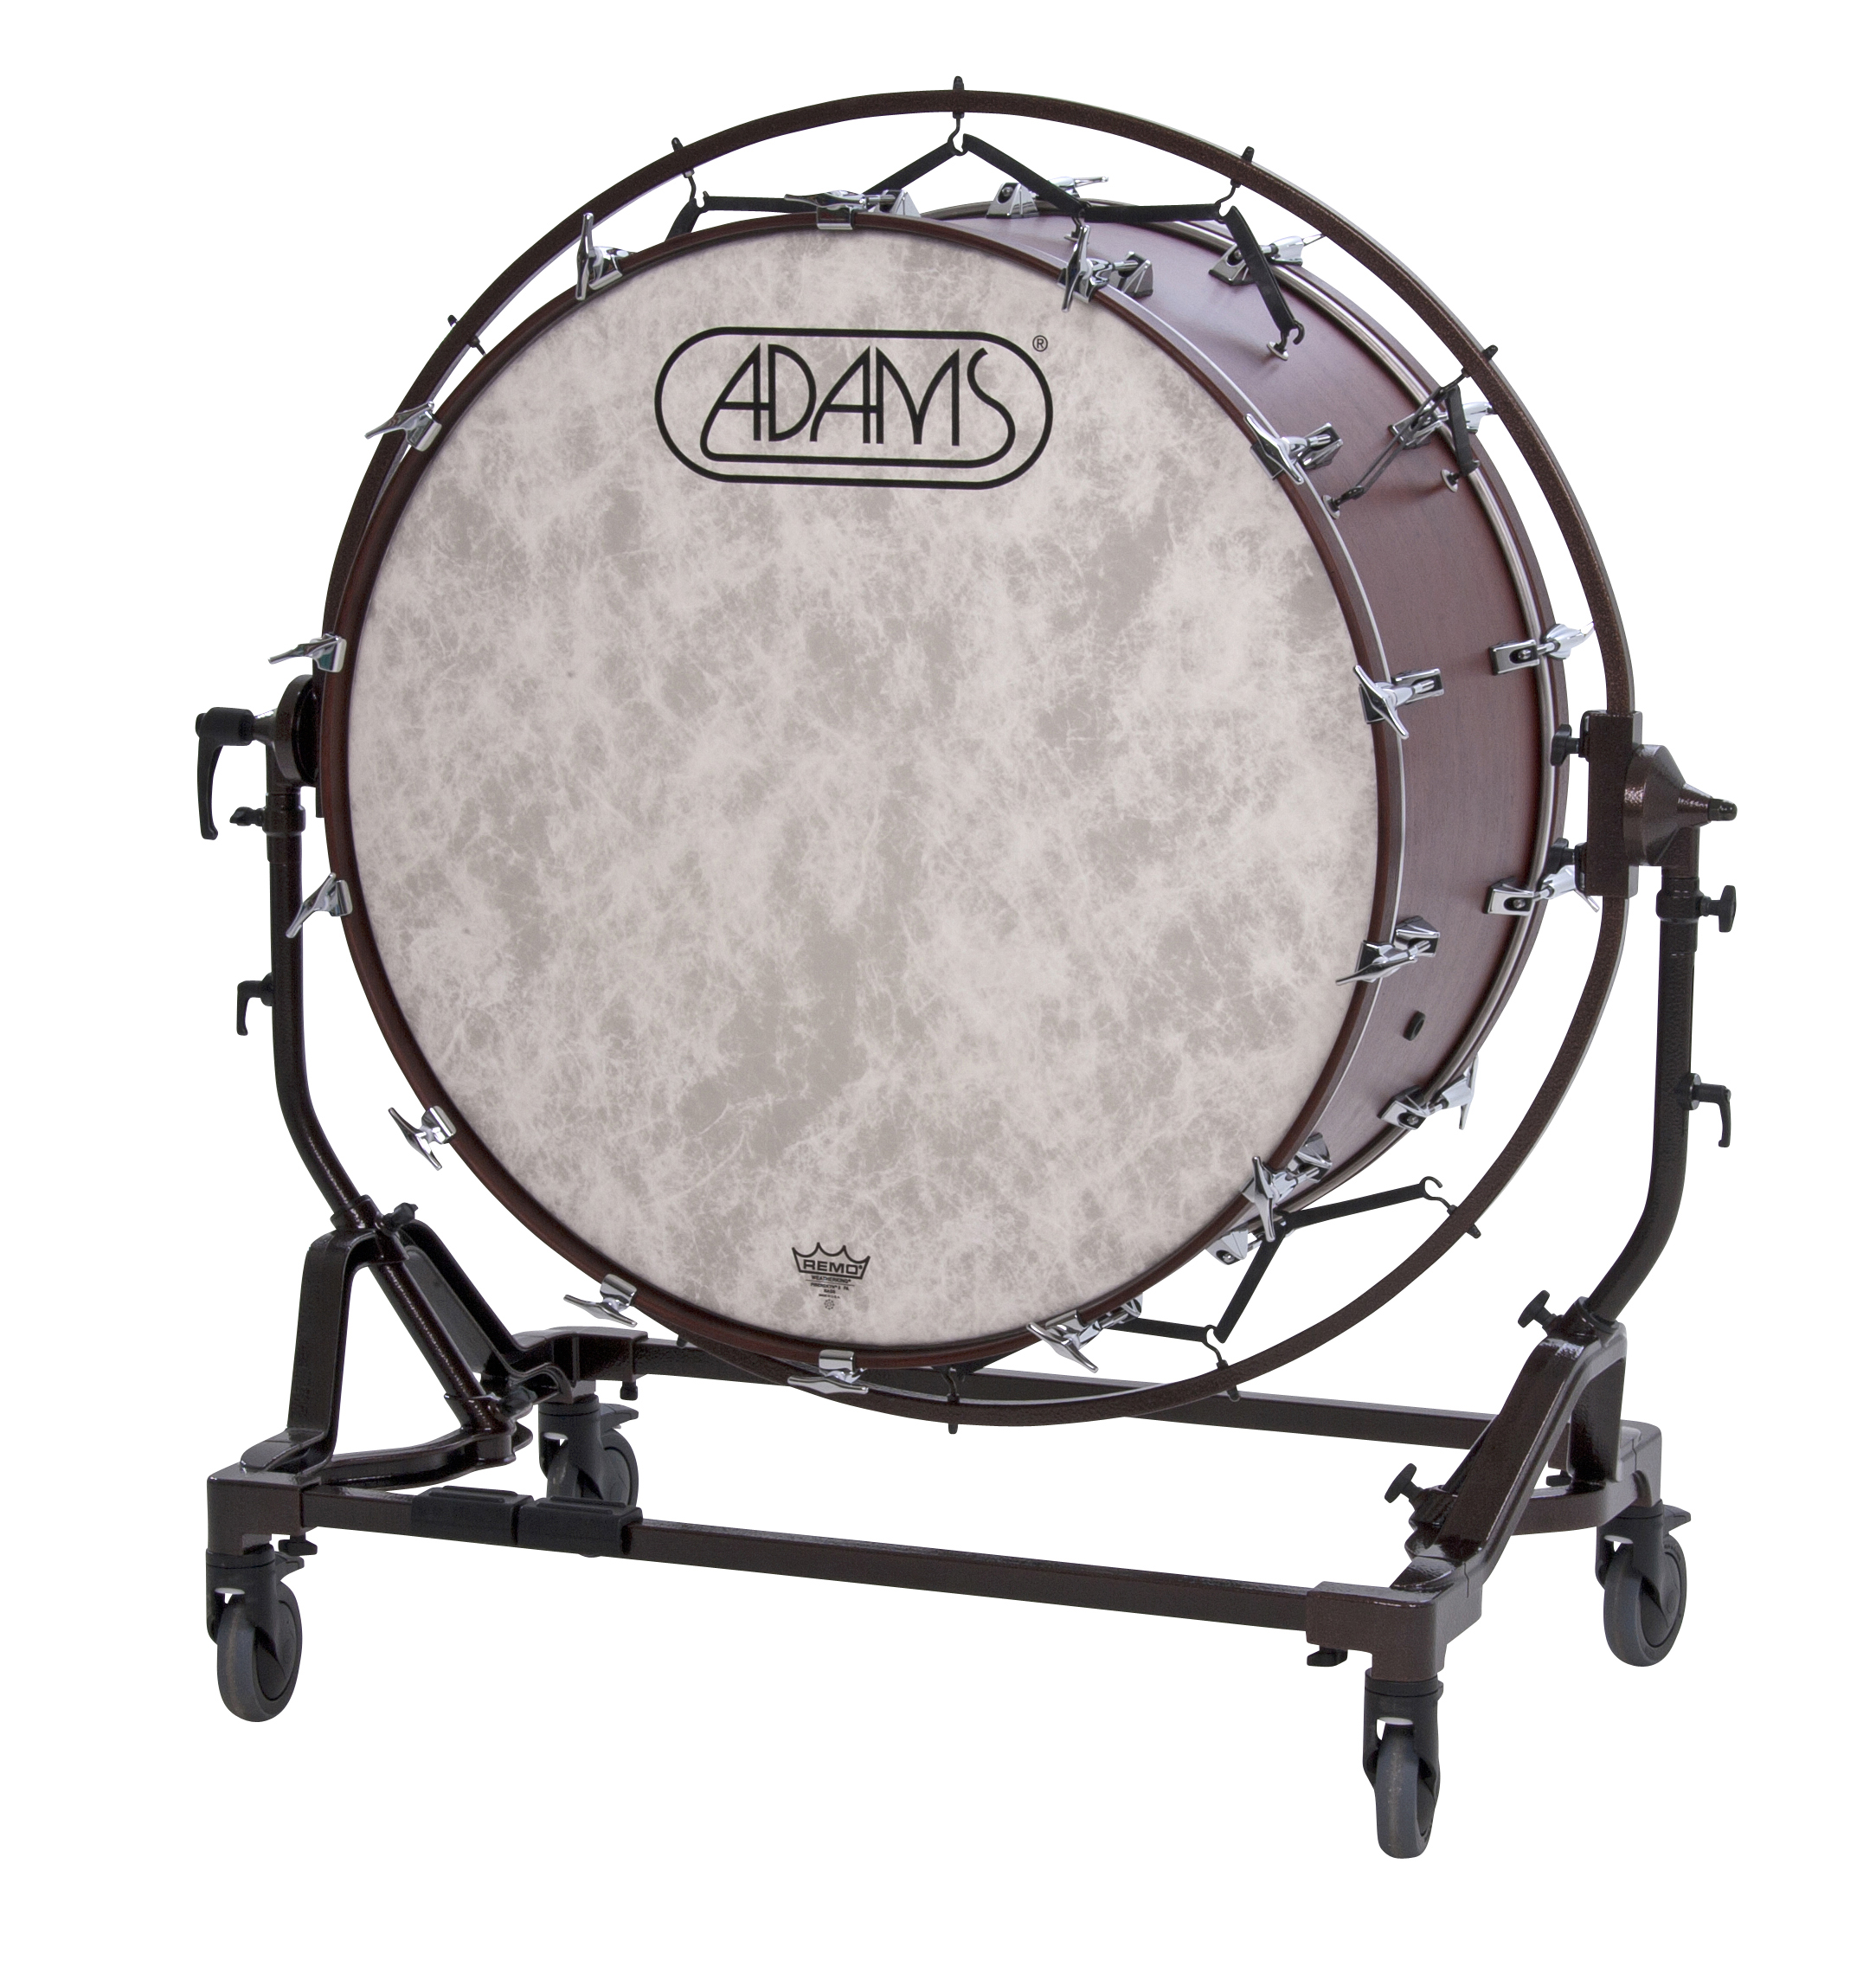 Free Suspended Bass Drum 28” x 18”